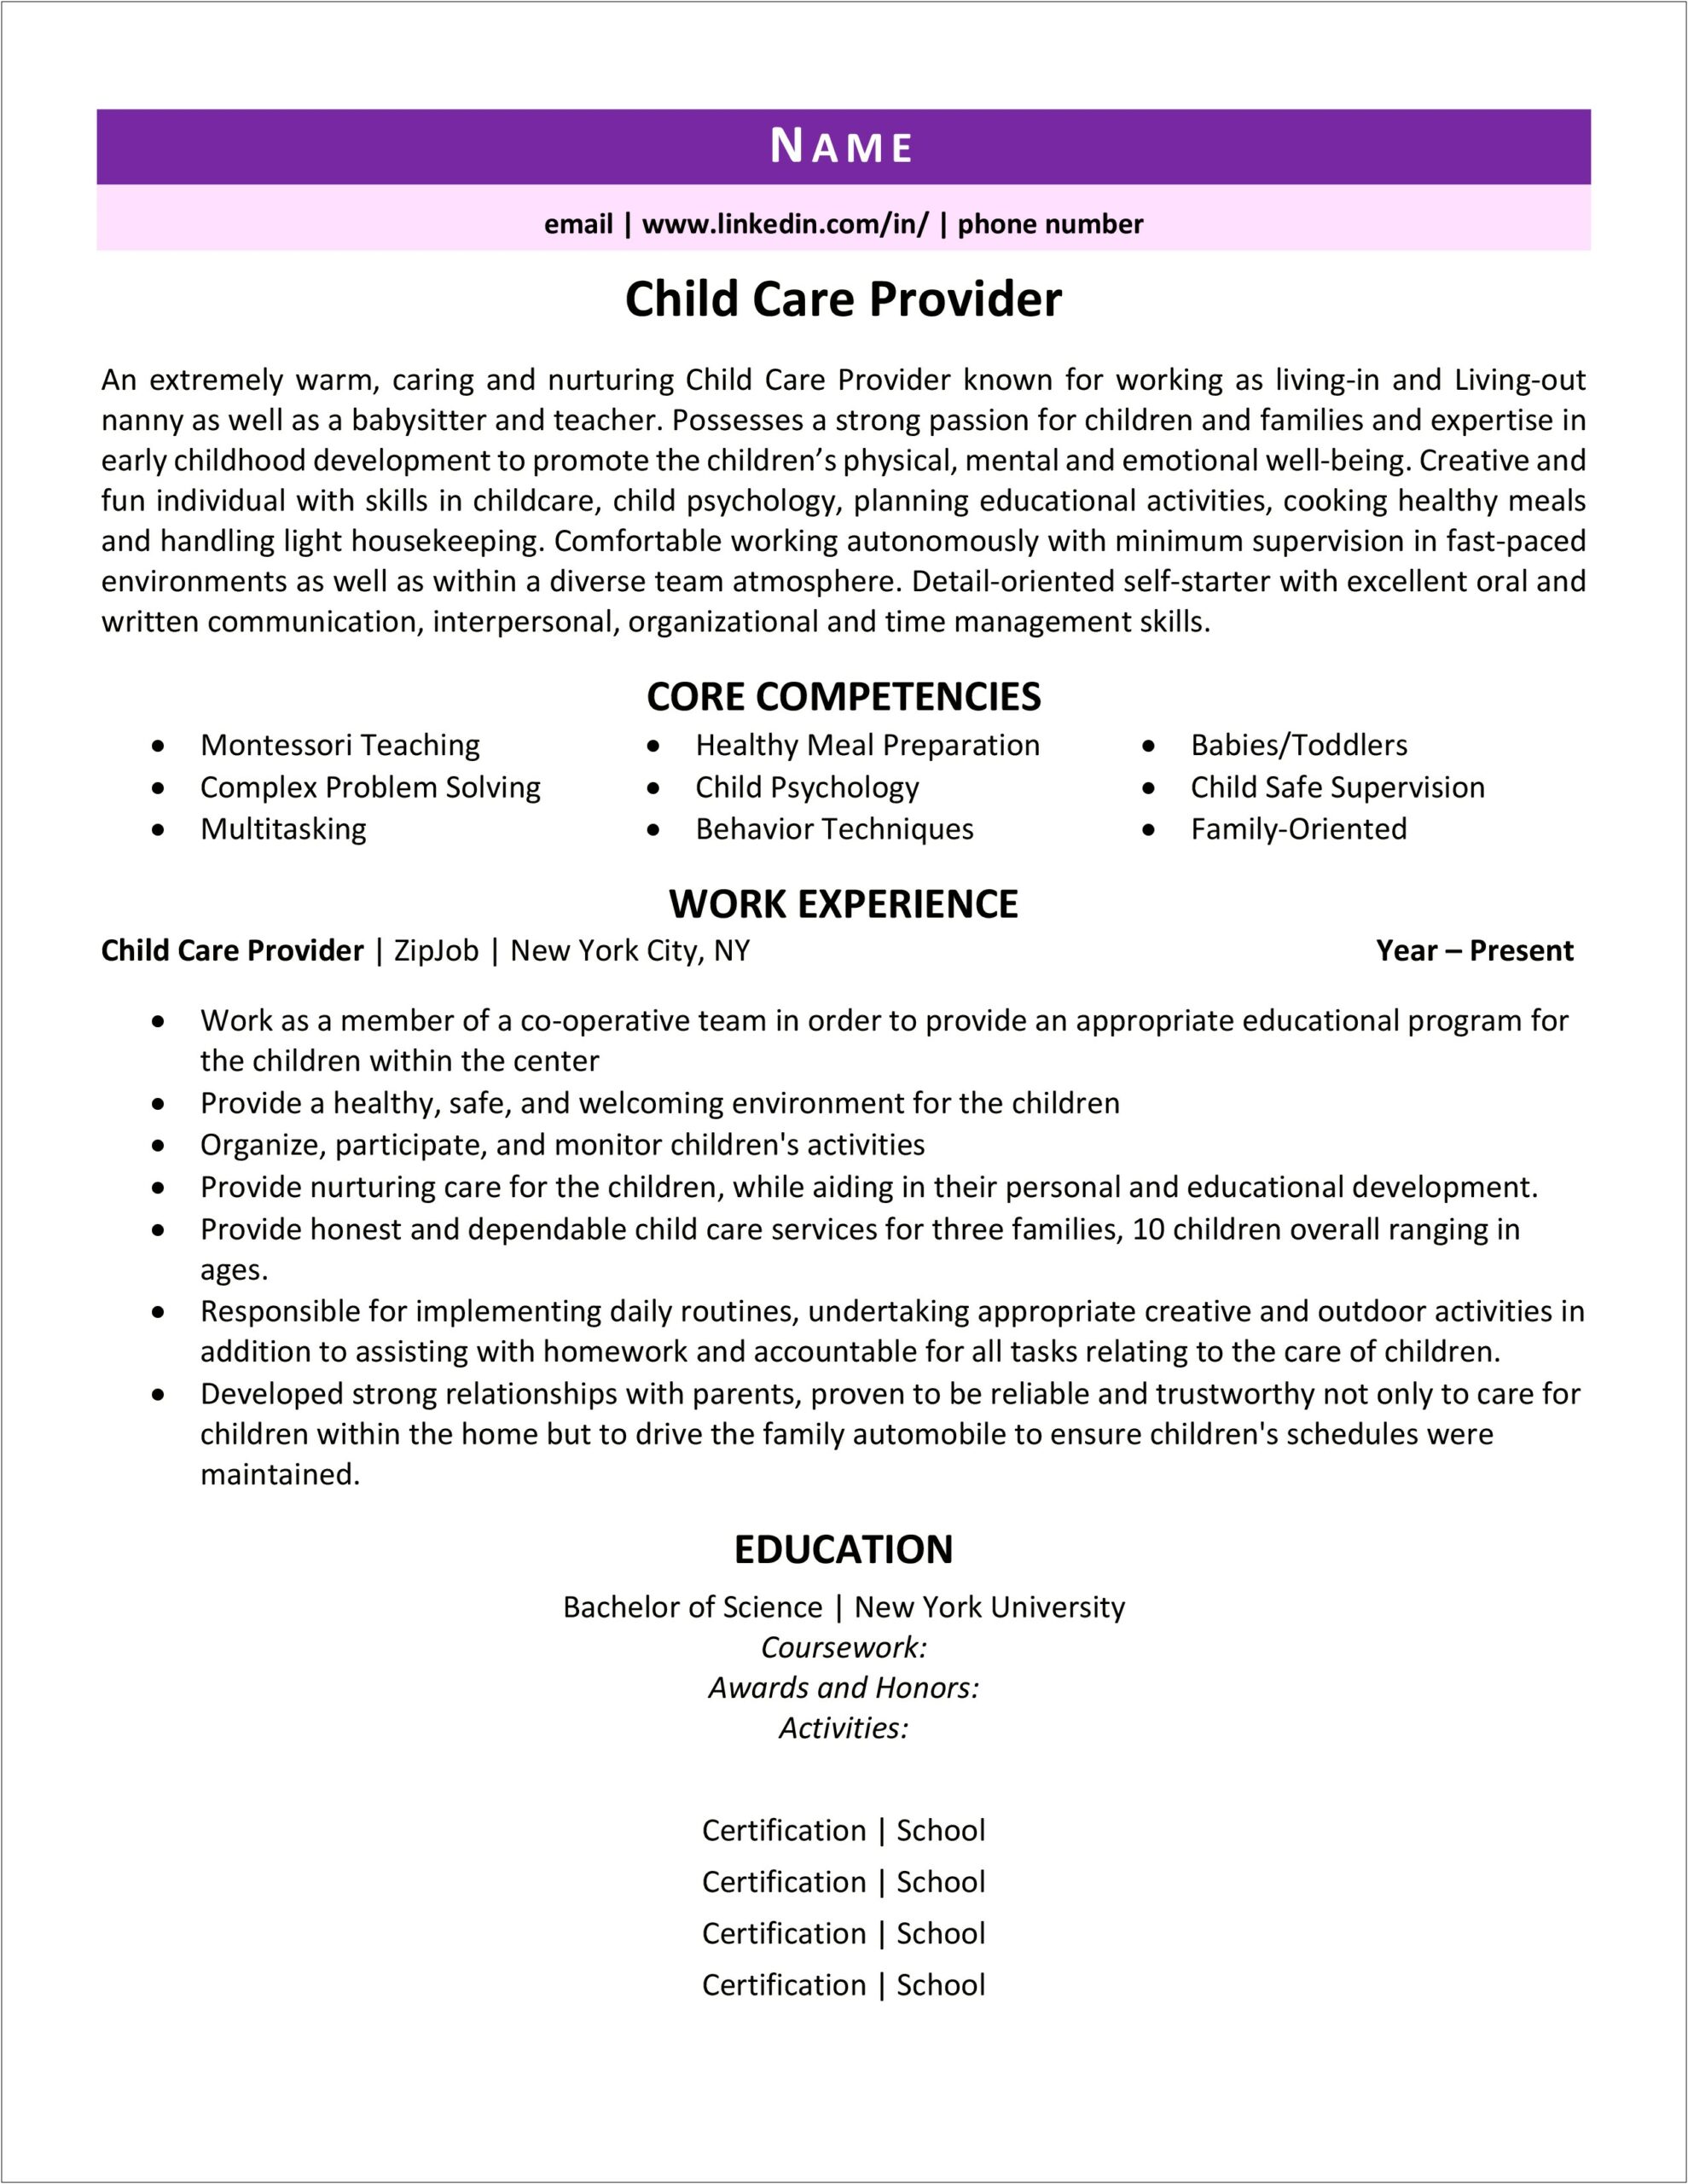 Special Skills Resume Experience With Childcare